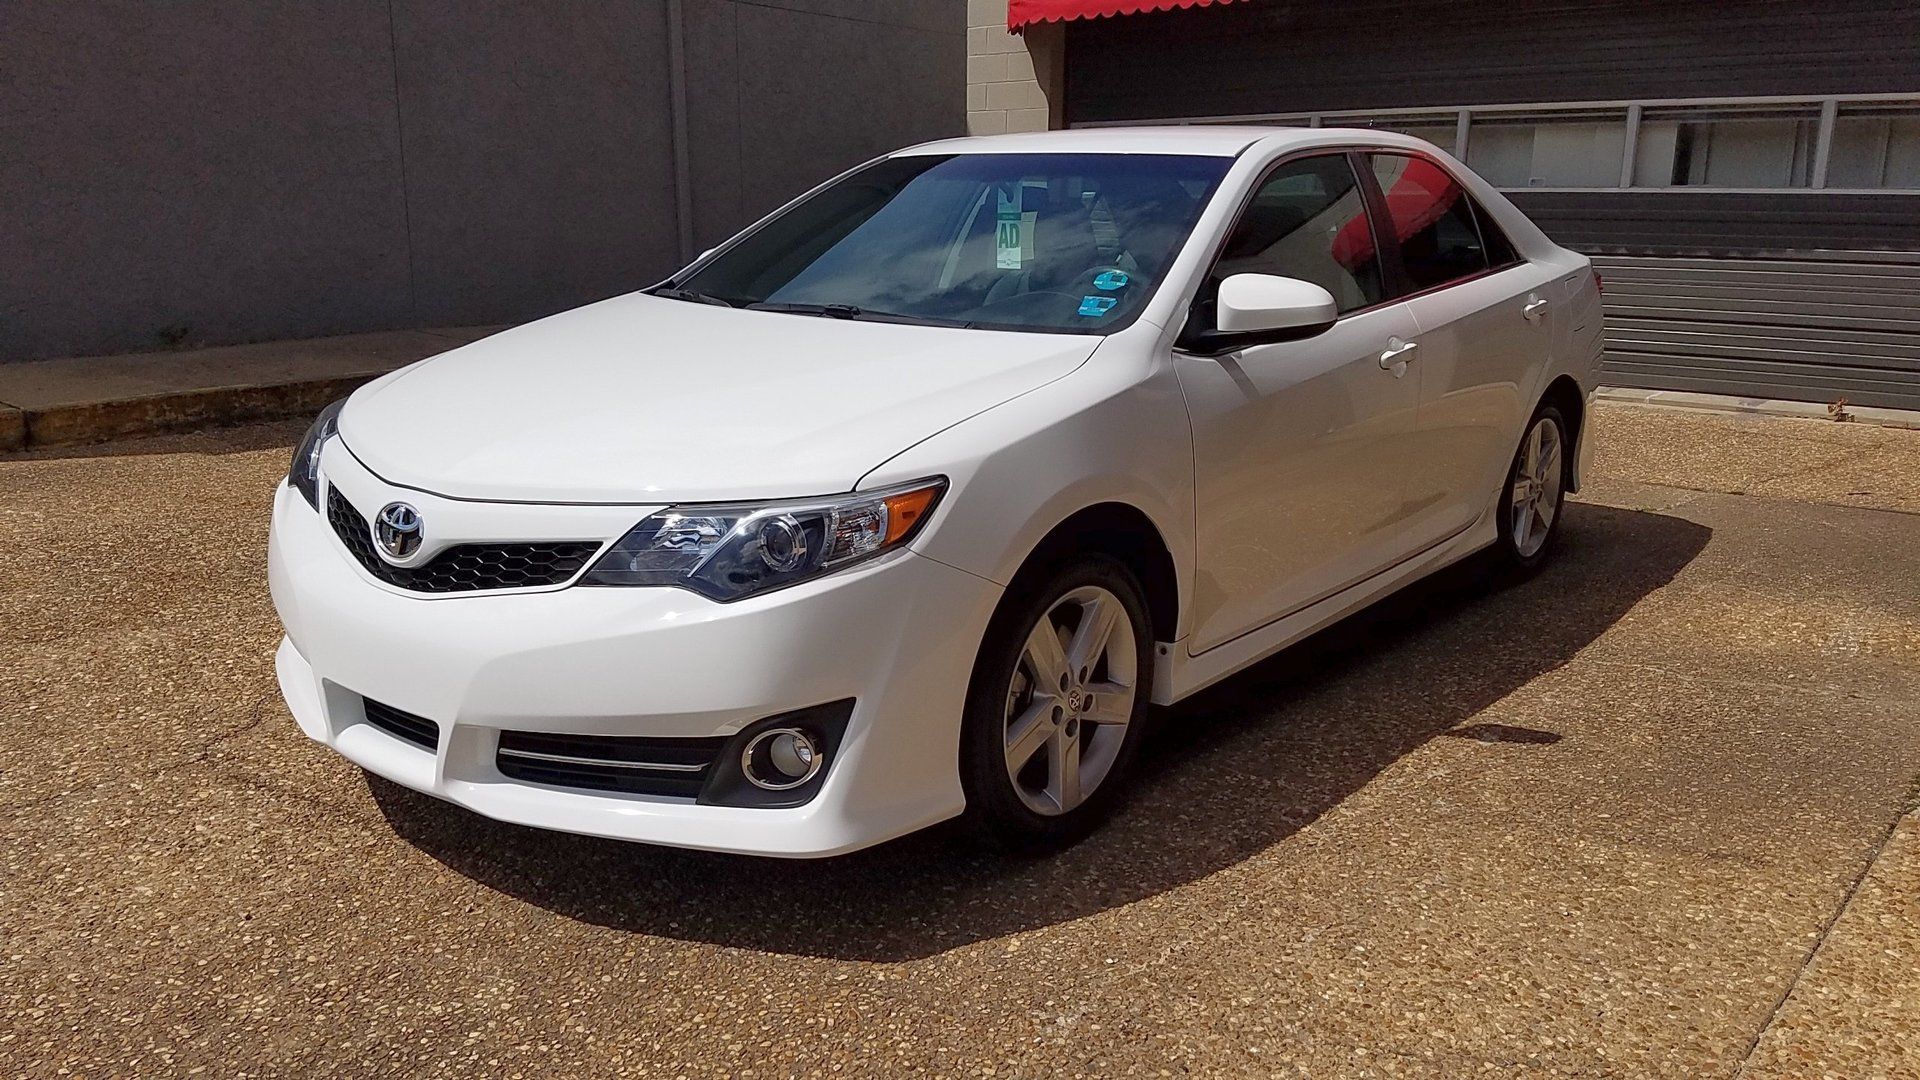 Full Service Collision Center - 2014+Camry04 1920w